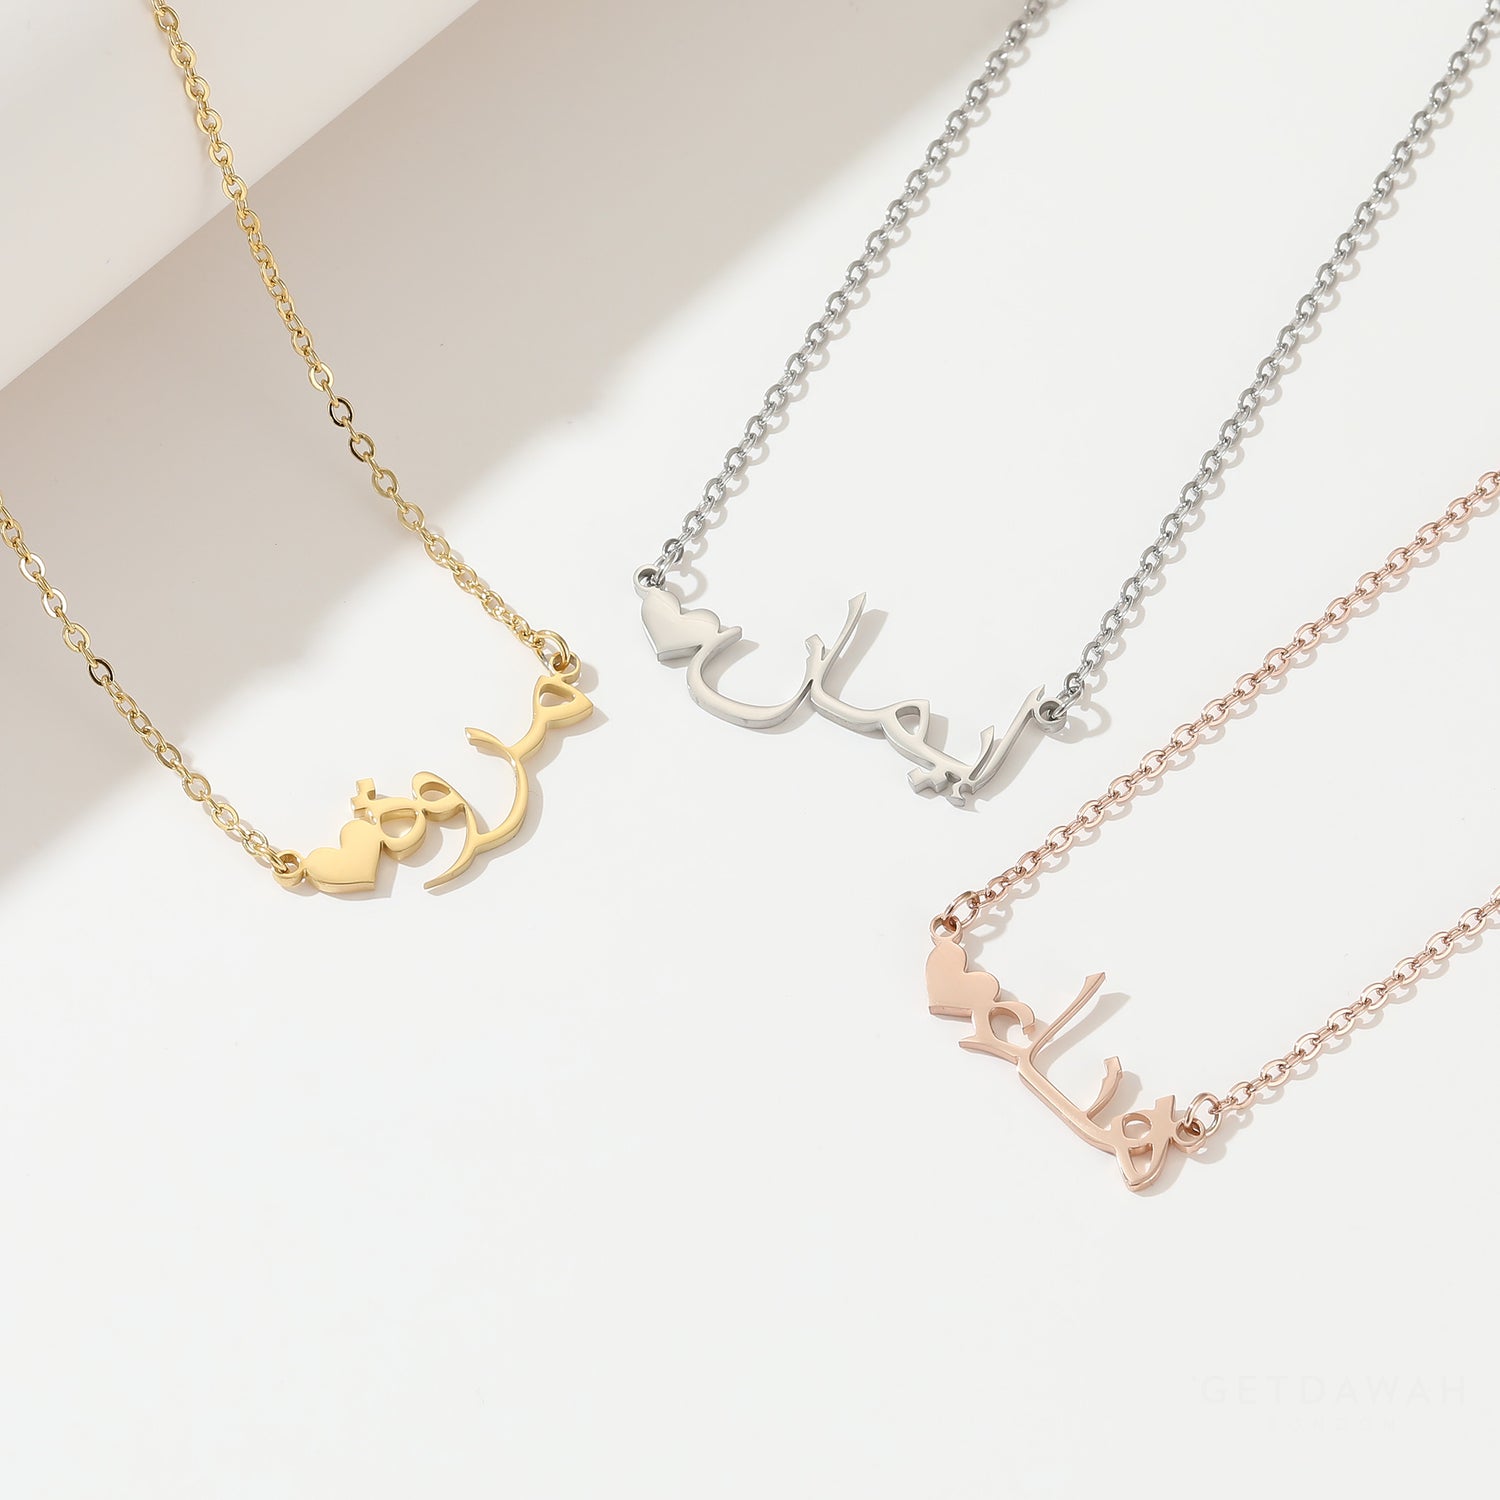 Custom Arabic Name Heart Necklace + Free Gift Pouch